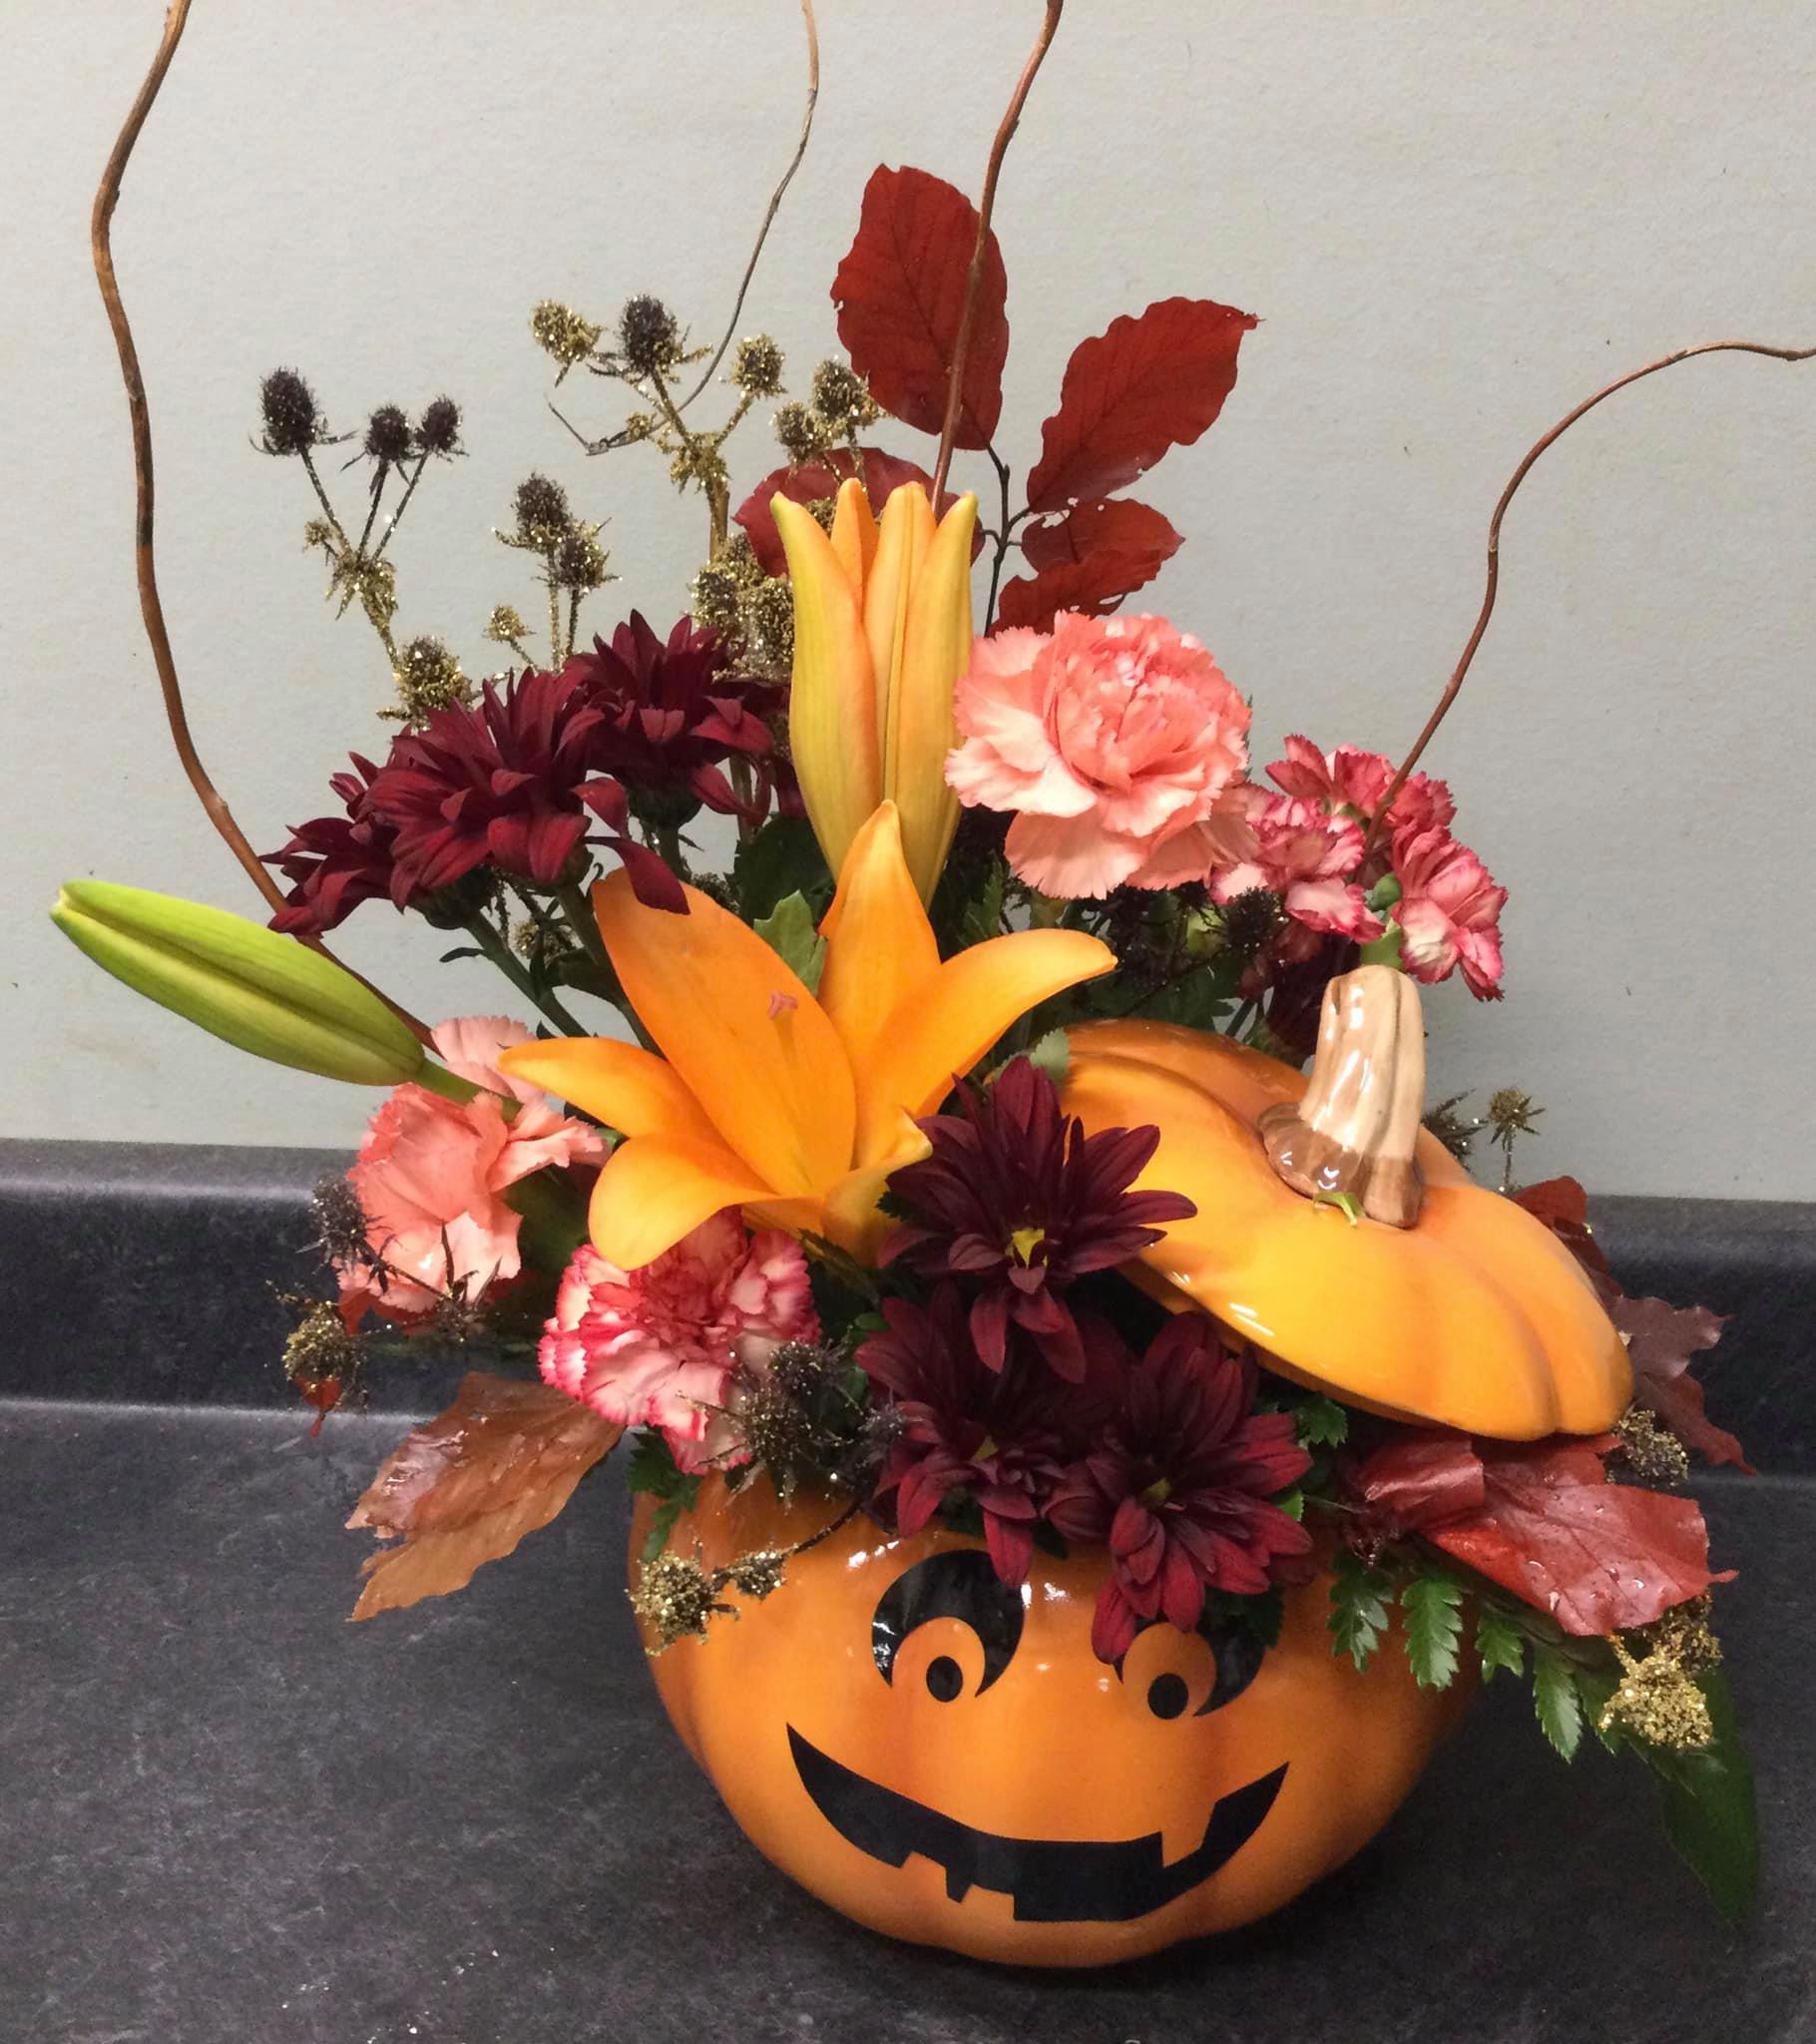 Floral arrangement of daylilies and carnations in a jack-o-lantern ceramic jar